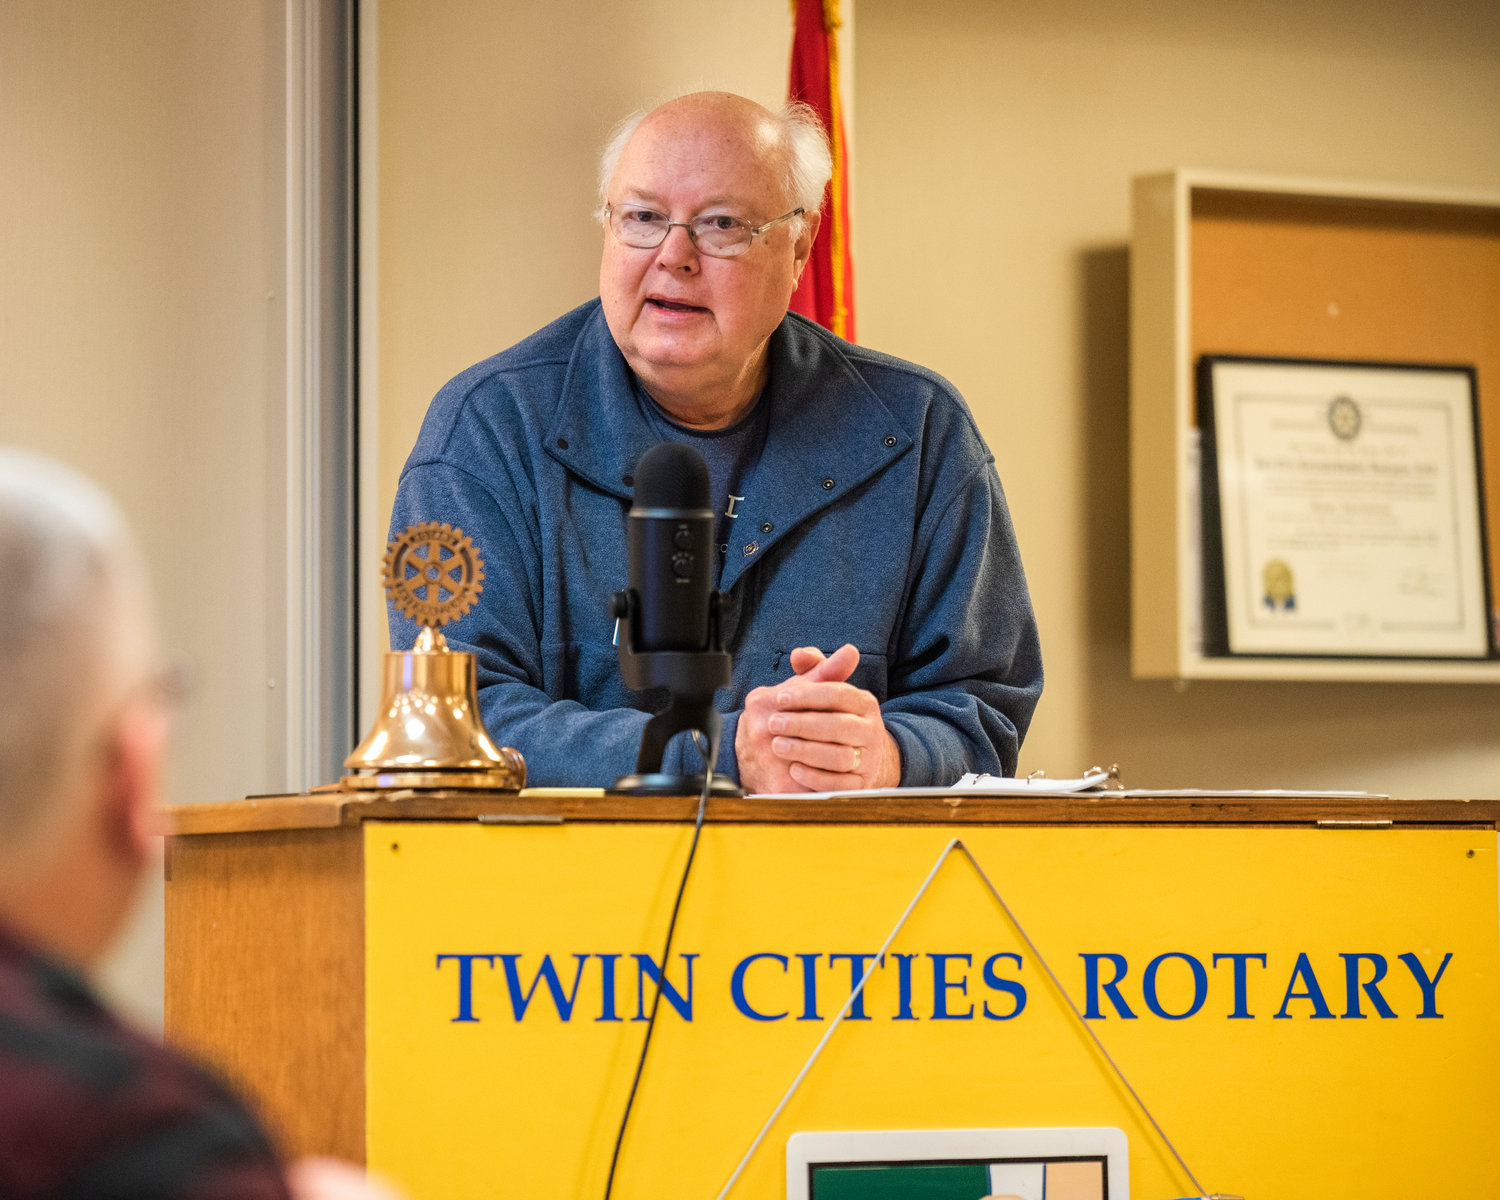 Larry McGee, a Twin Cities Rotary Club member, speaks at a Friday morning club meeting about a recent Zoom call with Polish Rotarians 30 kilometers from the Ukrainian border.